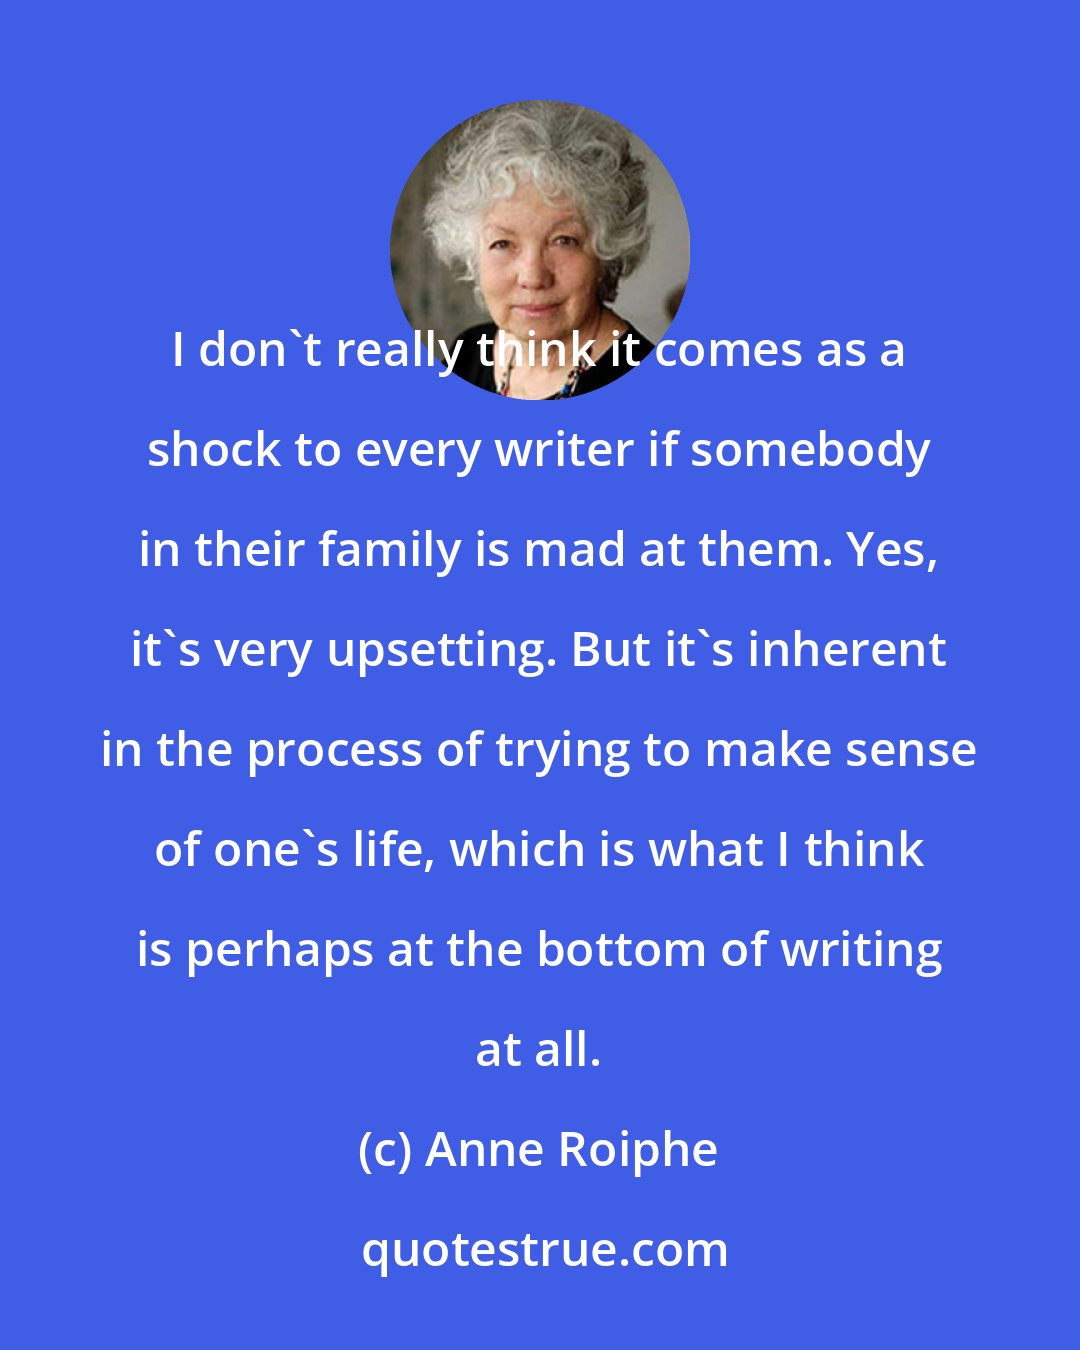 Anne Roiphe: I don't really think it comes as a shock to every writer if somebody in their family is mad at them. Yes, it's very upsetting. But it's inherent in the process of trying to make sense of one's life, which is what I think is perhaps at the bottom of writing at all.